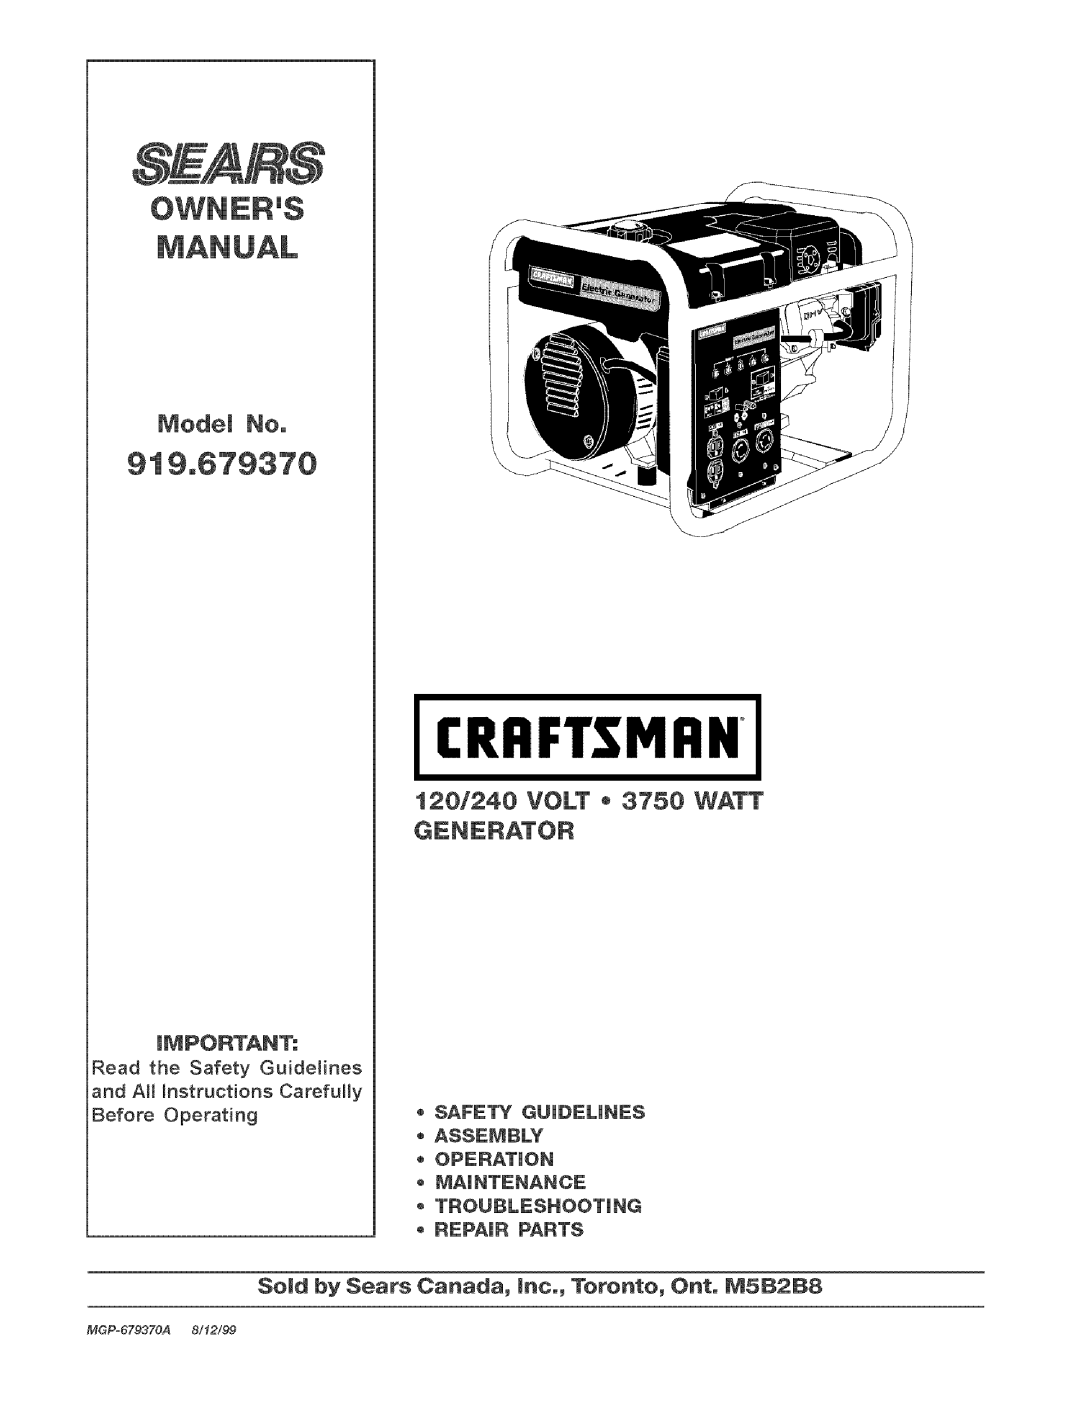 Craftsman 919.67937 manual Guudelunes, Troublesnootung, Parts 